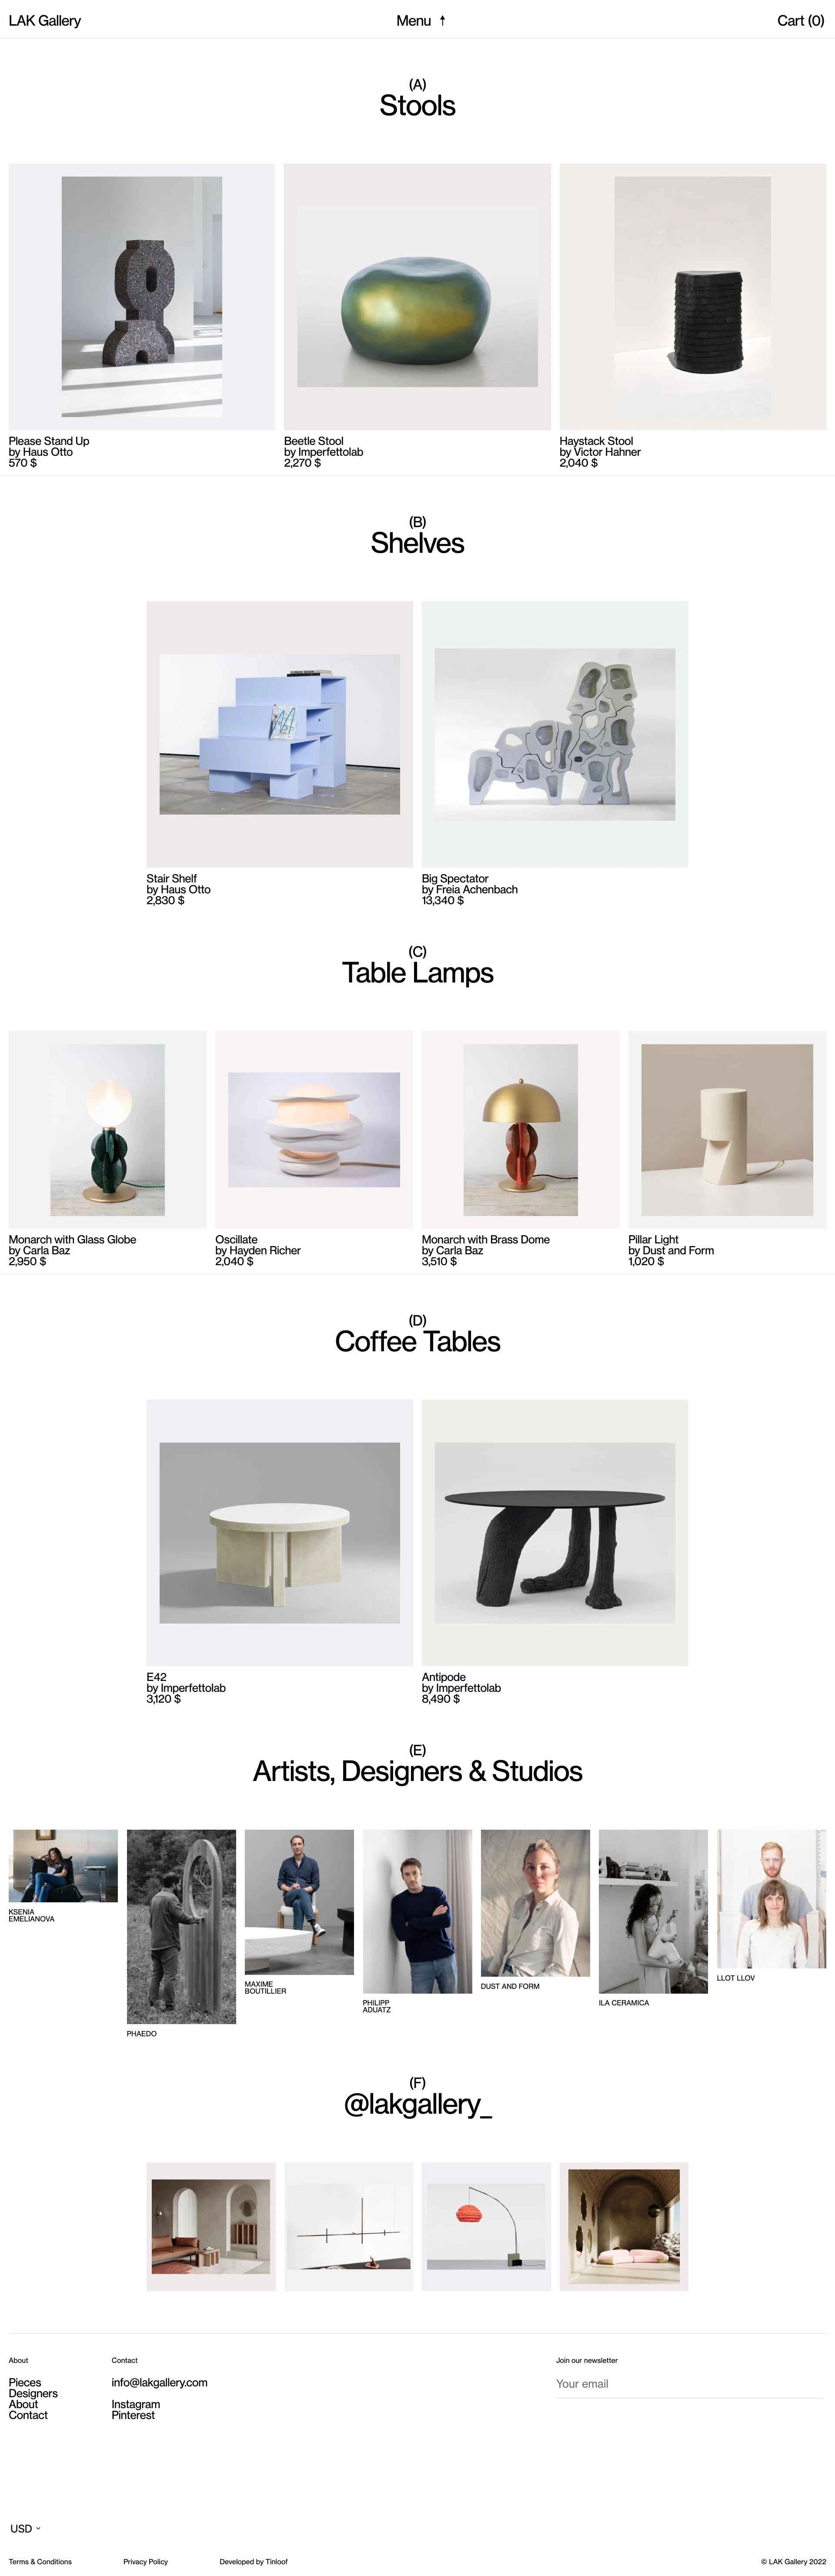 LAK Gallery Landing Page Example: LAK Gallery is an international design gallery with the goal of bridging the gap between collectors and creators of collectible design.